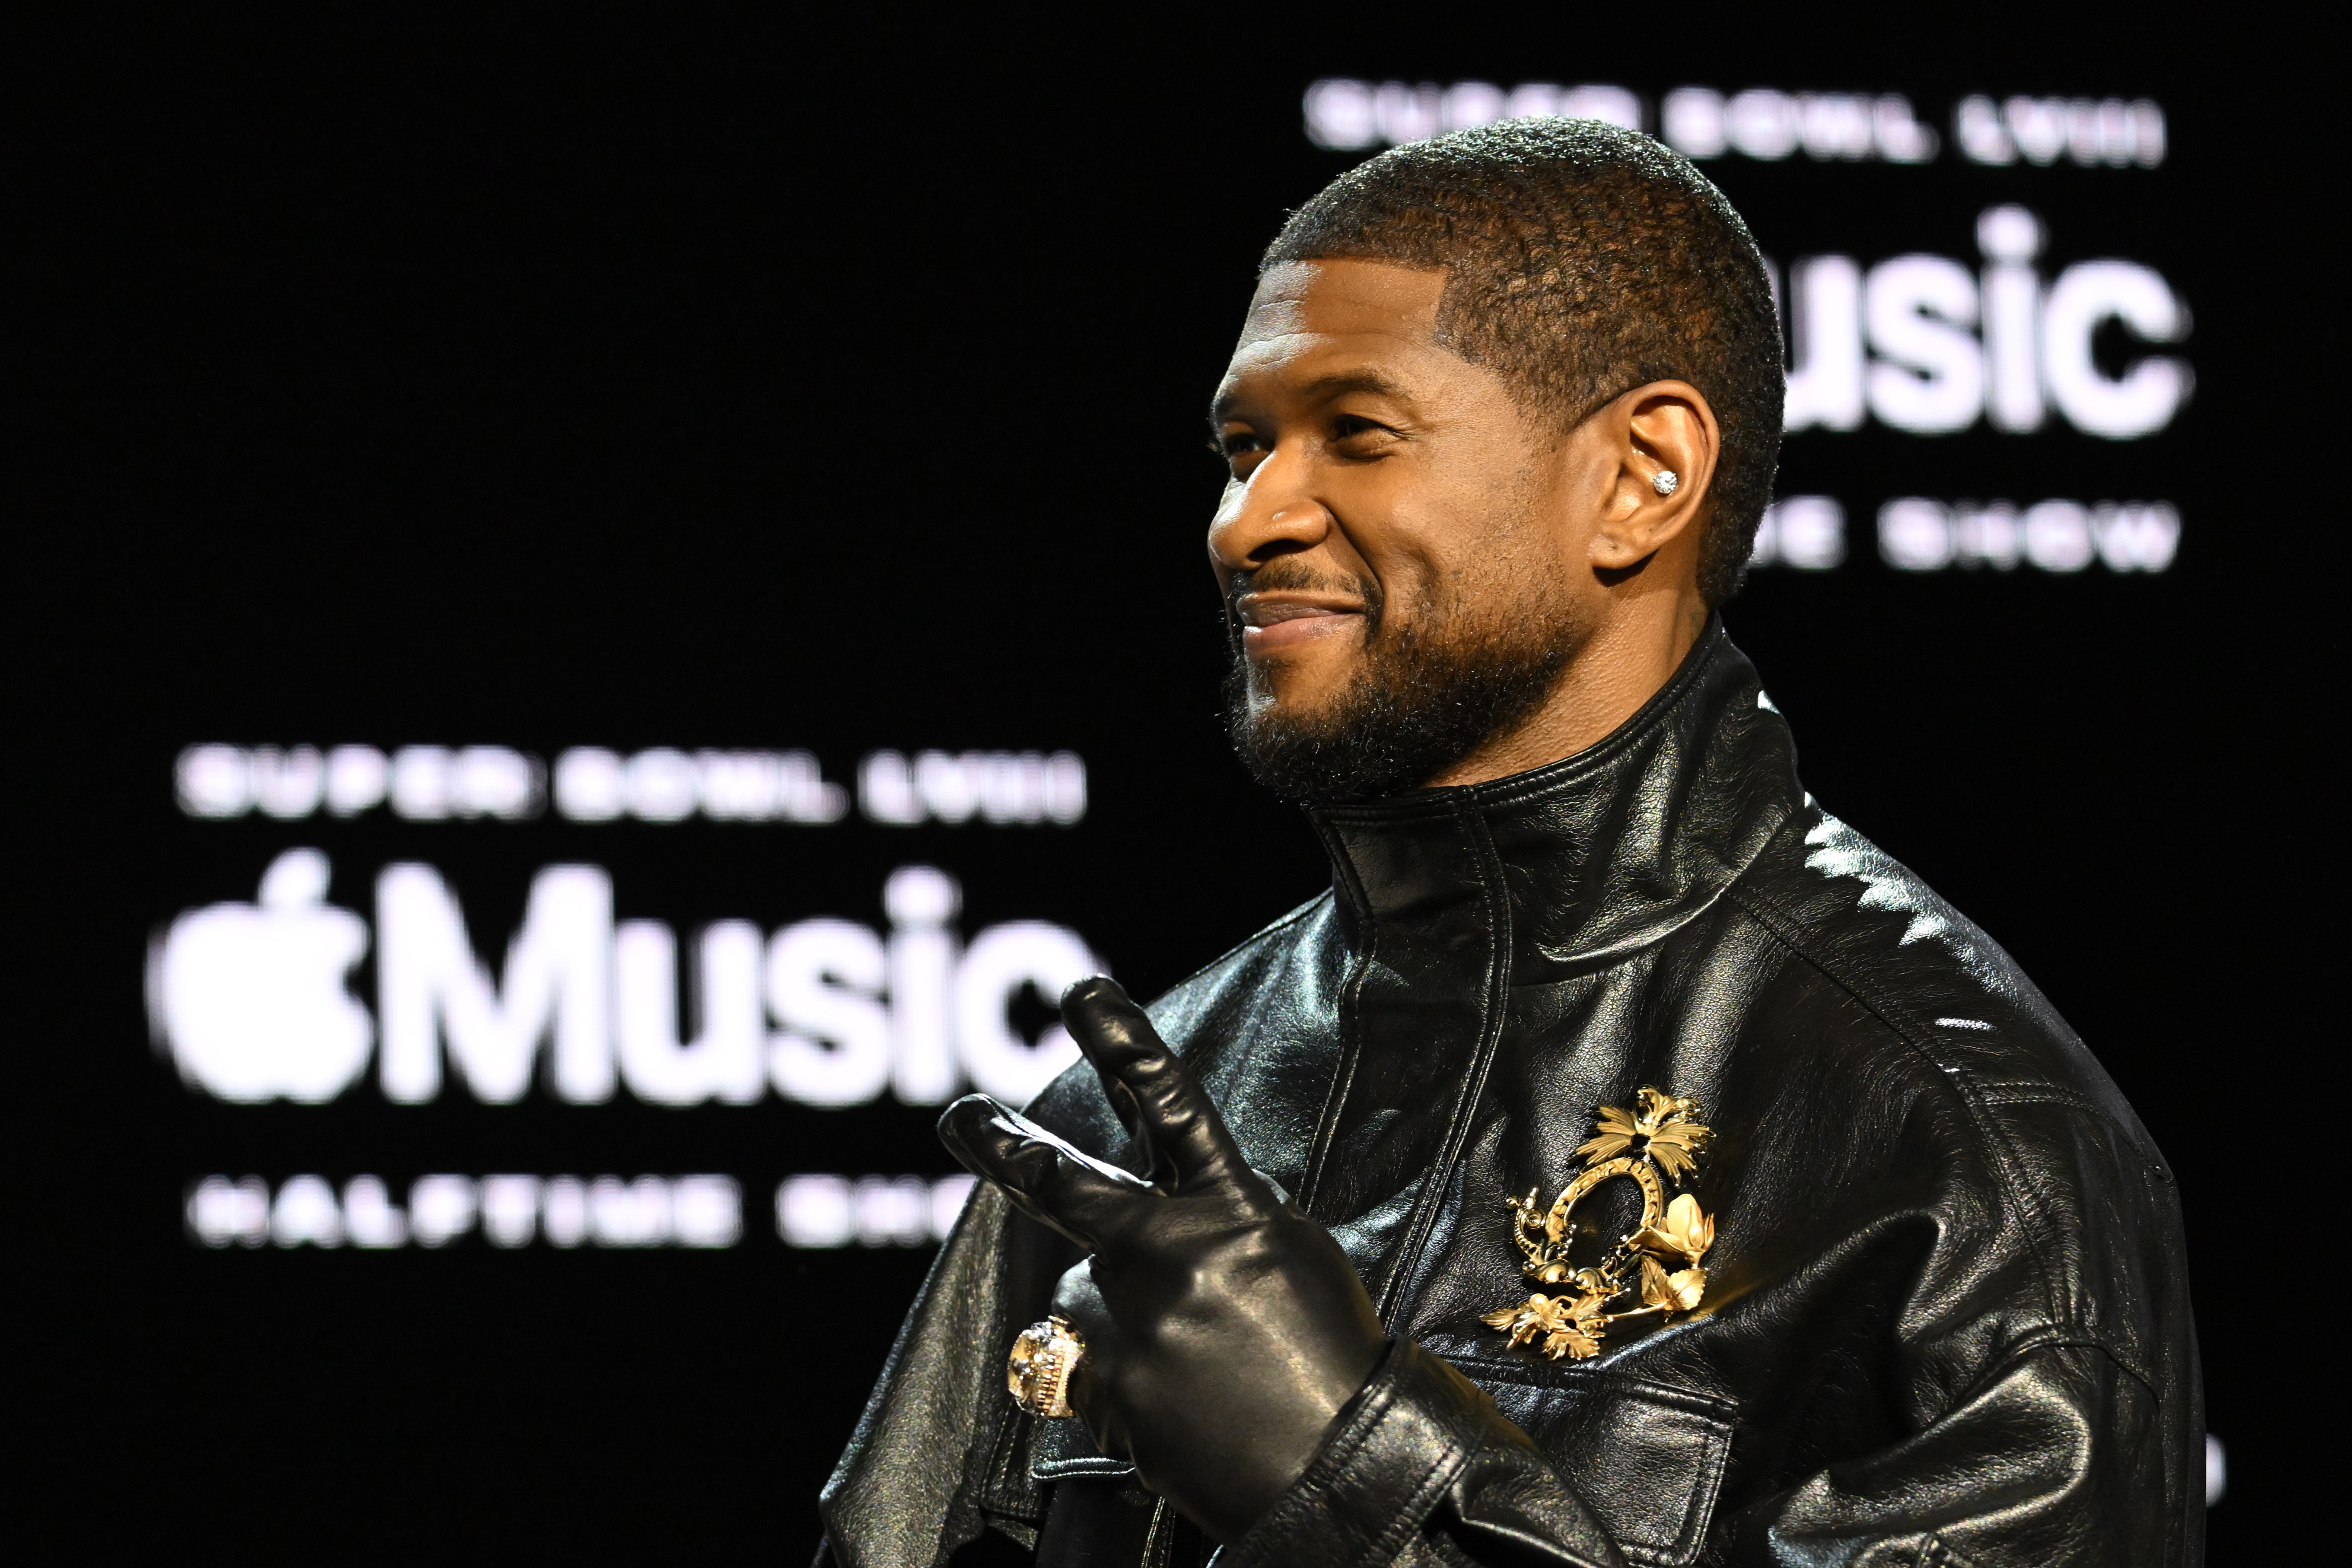 Usher will perform at the Apple Music Super Bowl LVIII halftime show